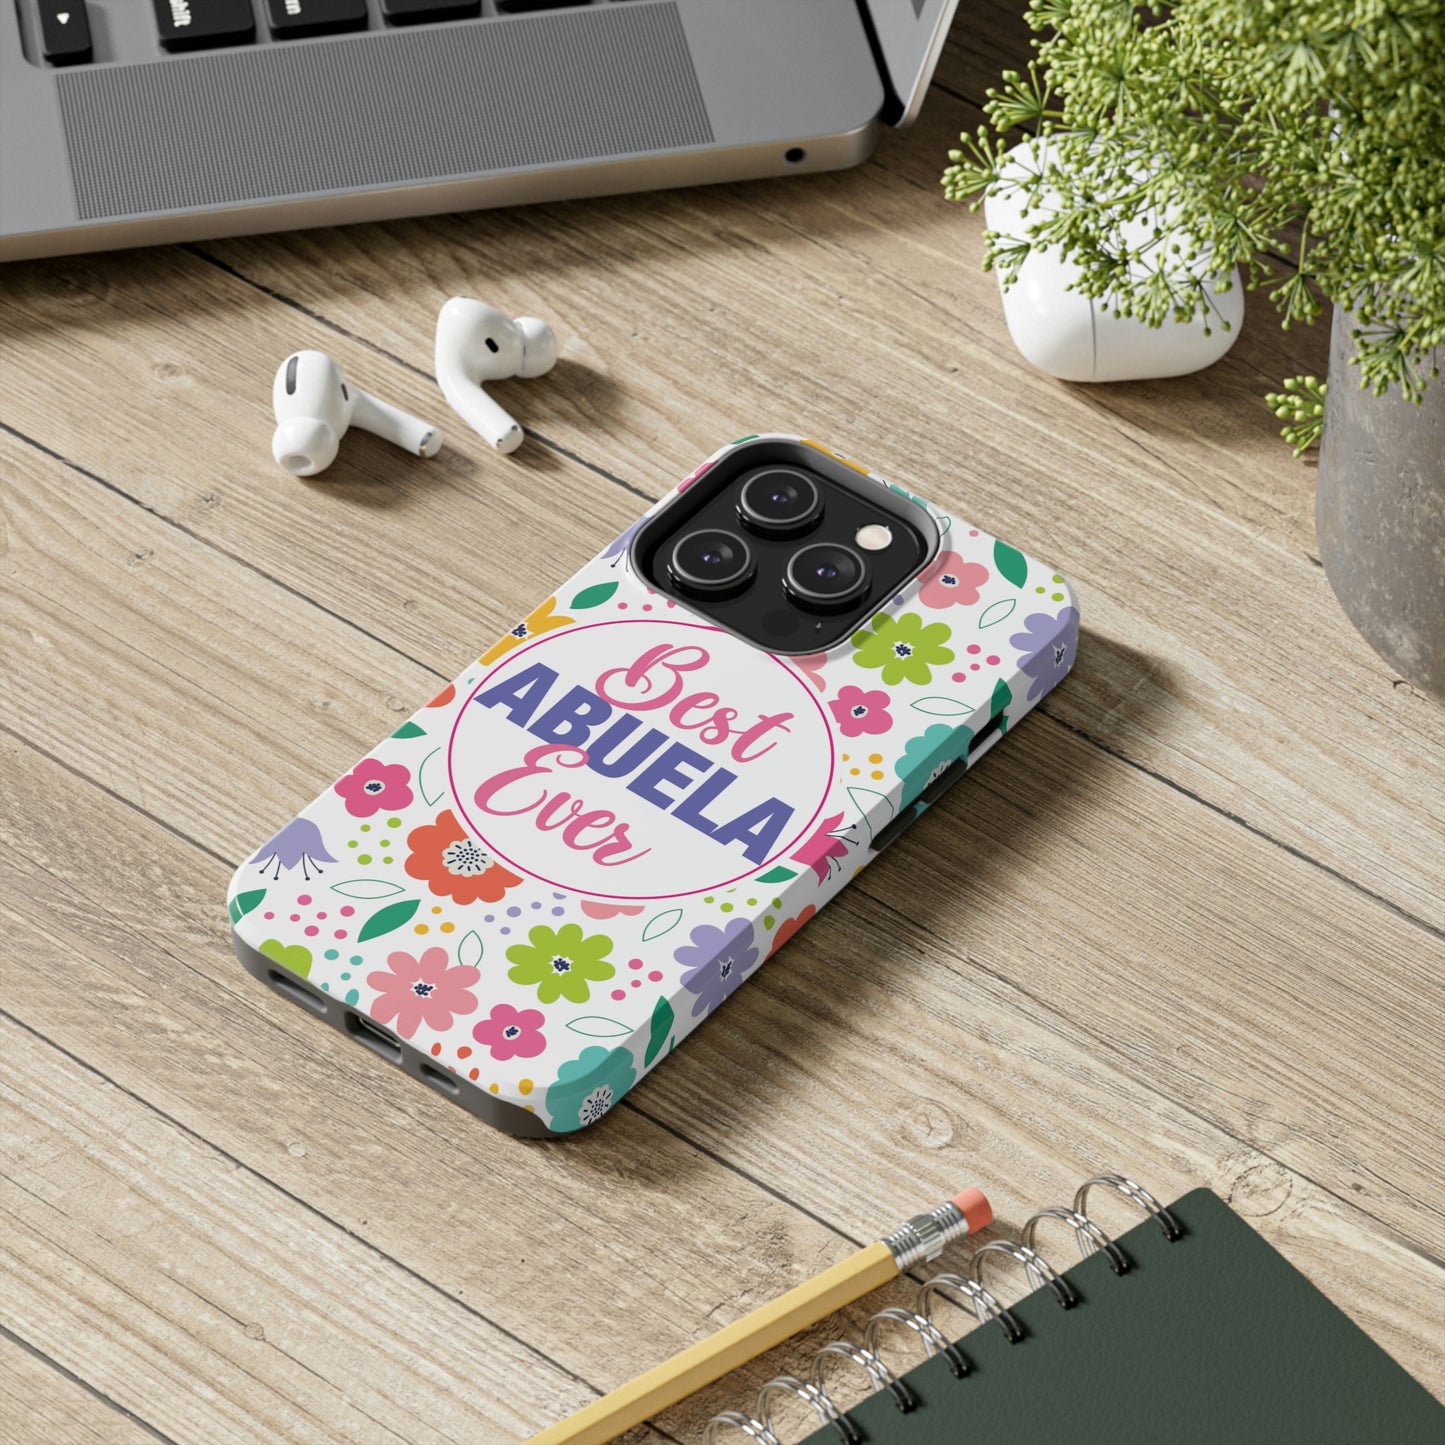 Best Abuela Ever Tough iPhone Cases, Case-Mate, Mother's Day Gift